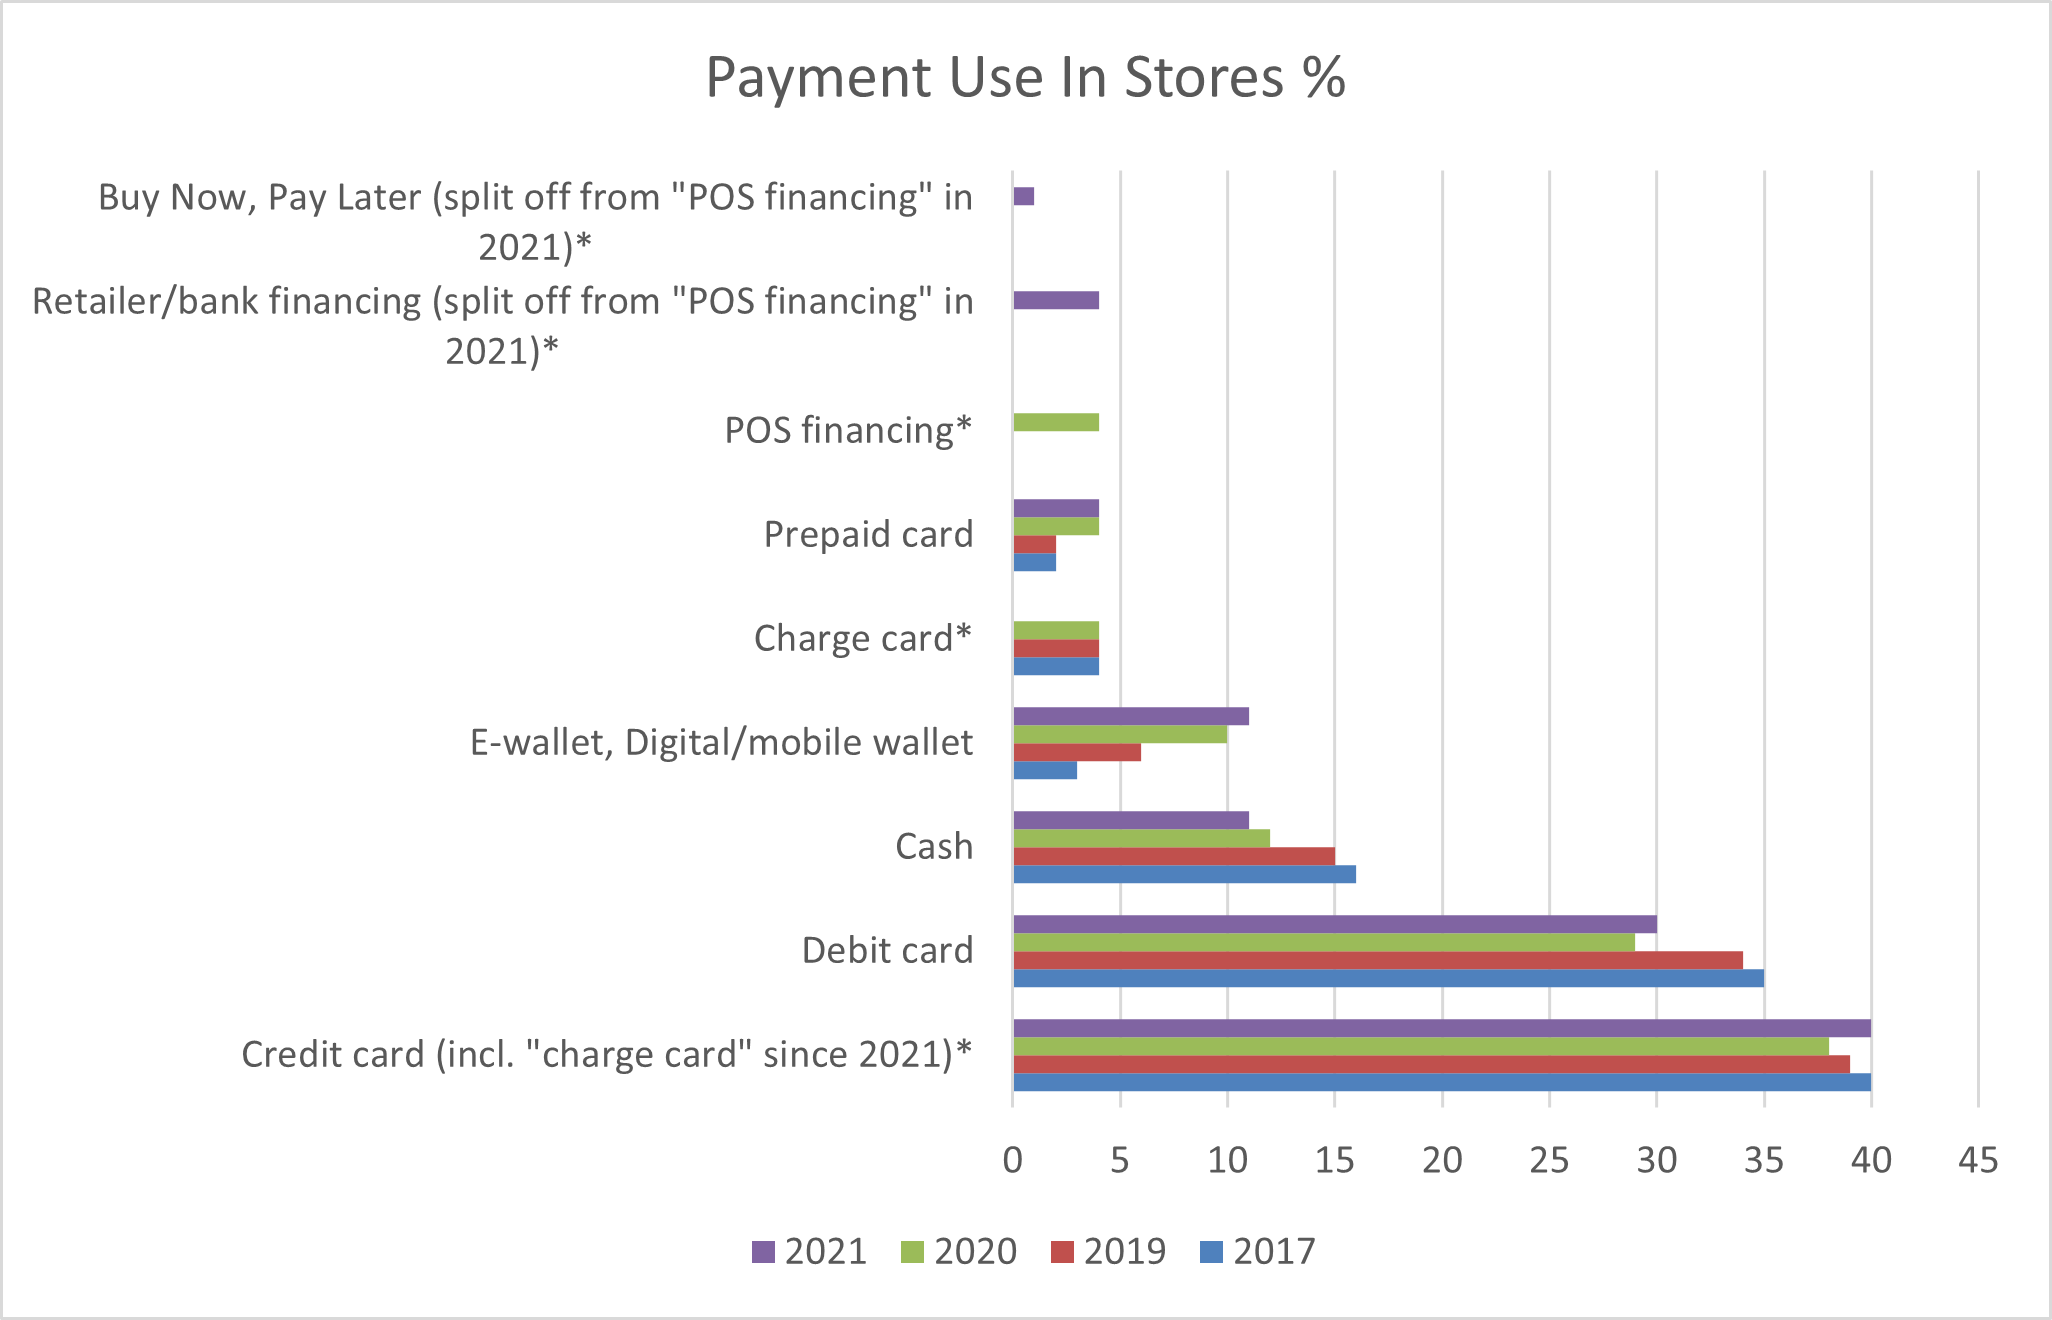 Bar chart of payment use in stores by percent, with credit card far ahead